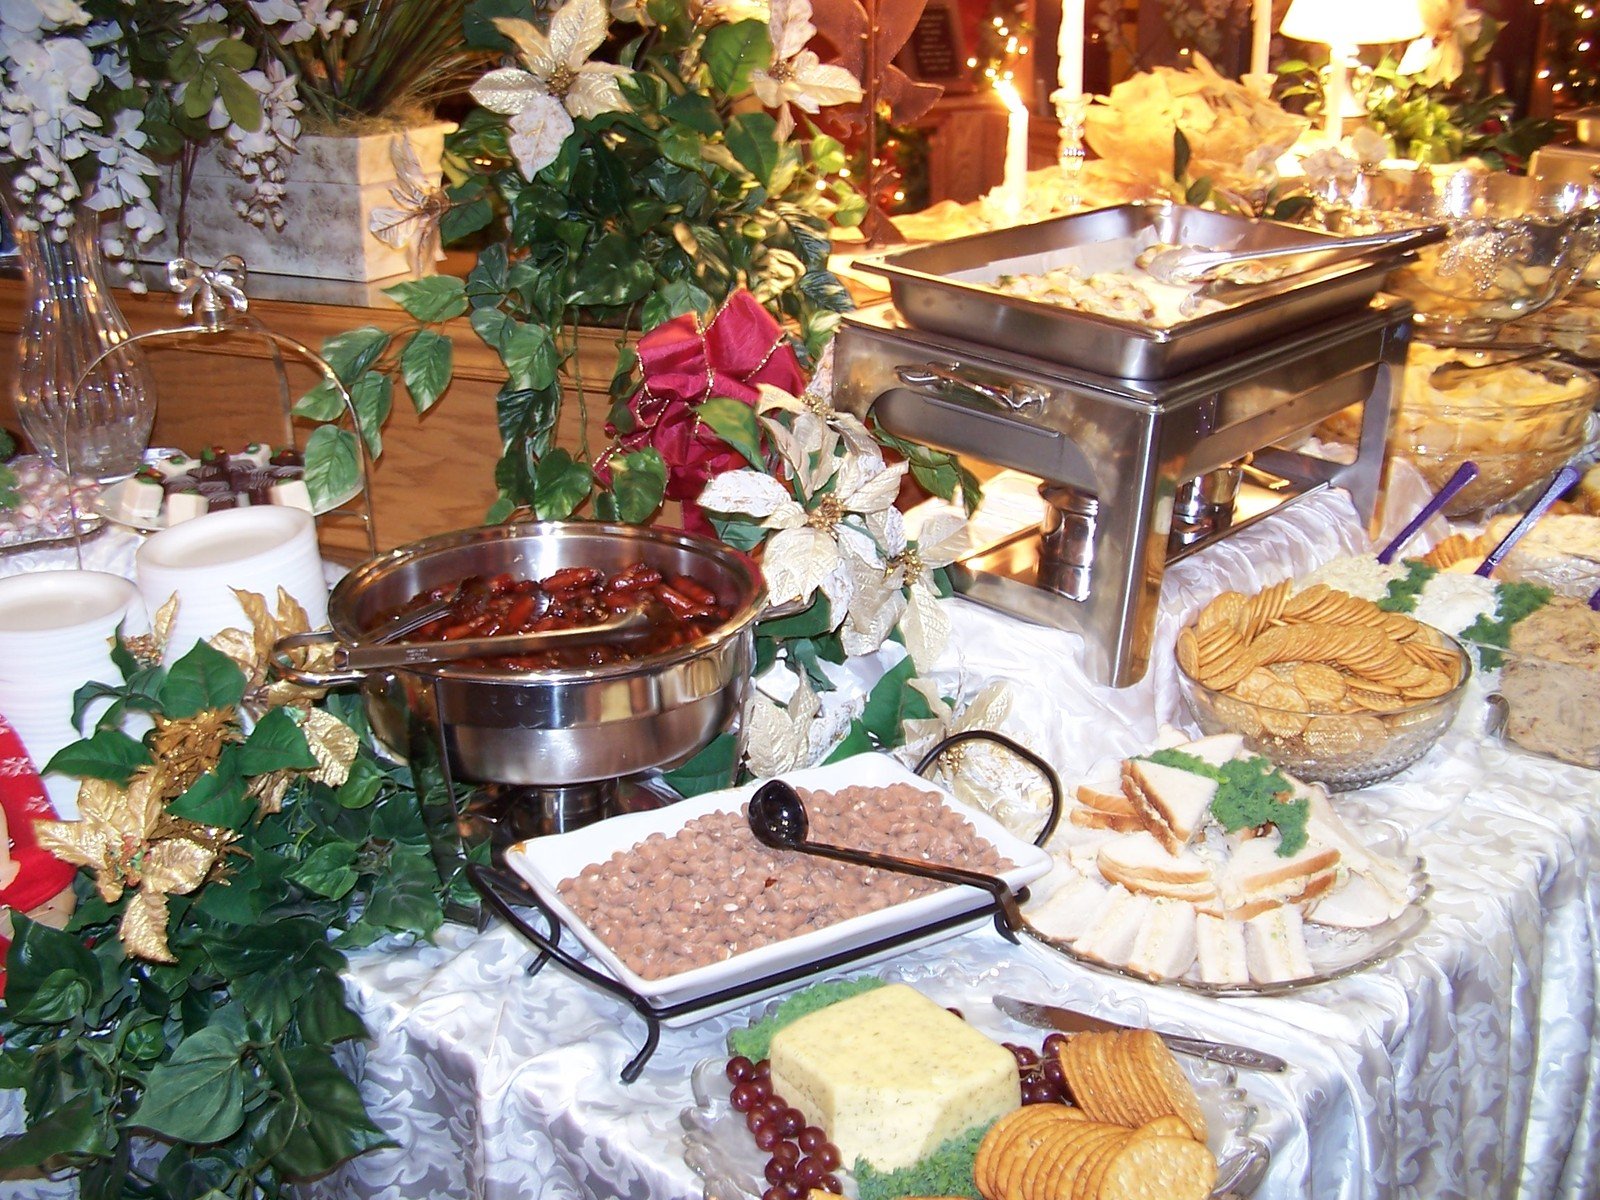 a buffet table has bread, ers, meats and fruits